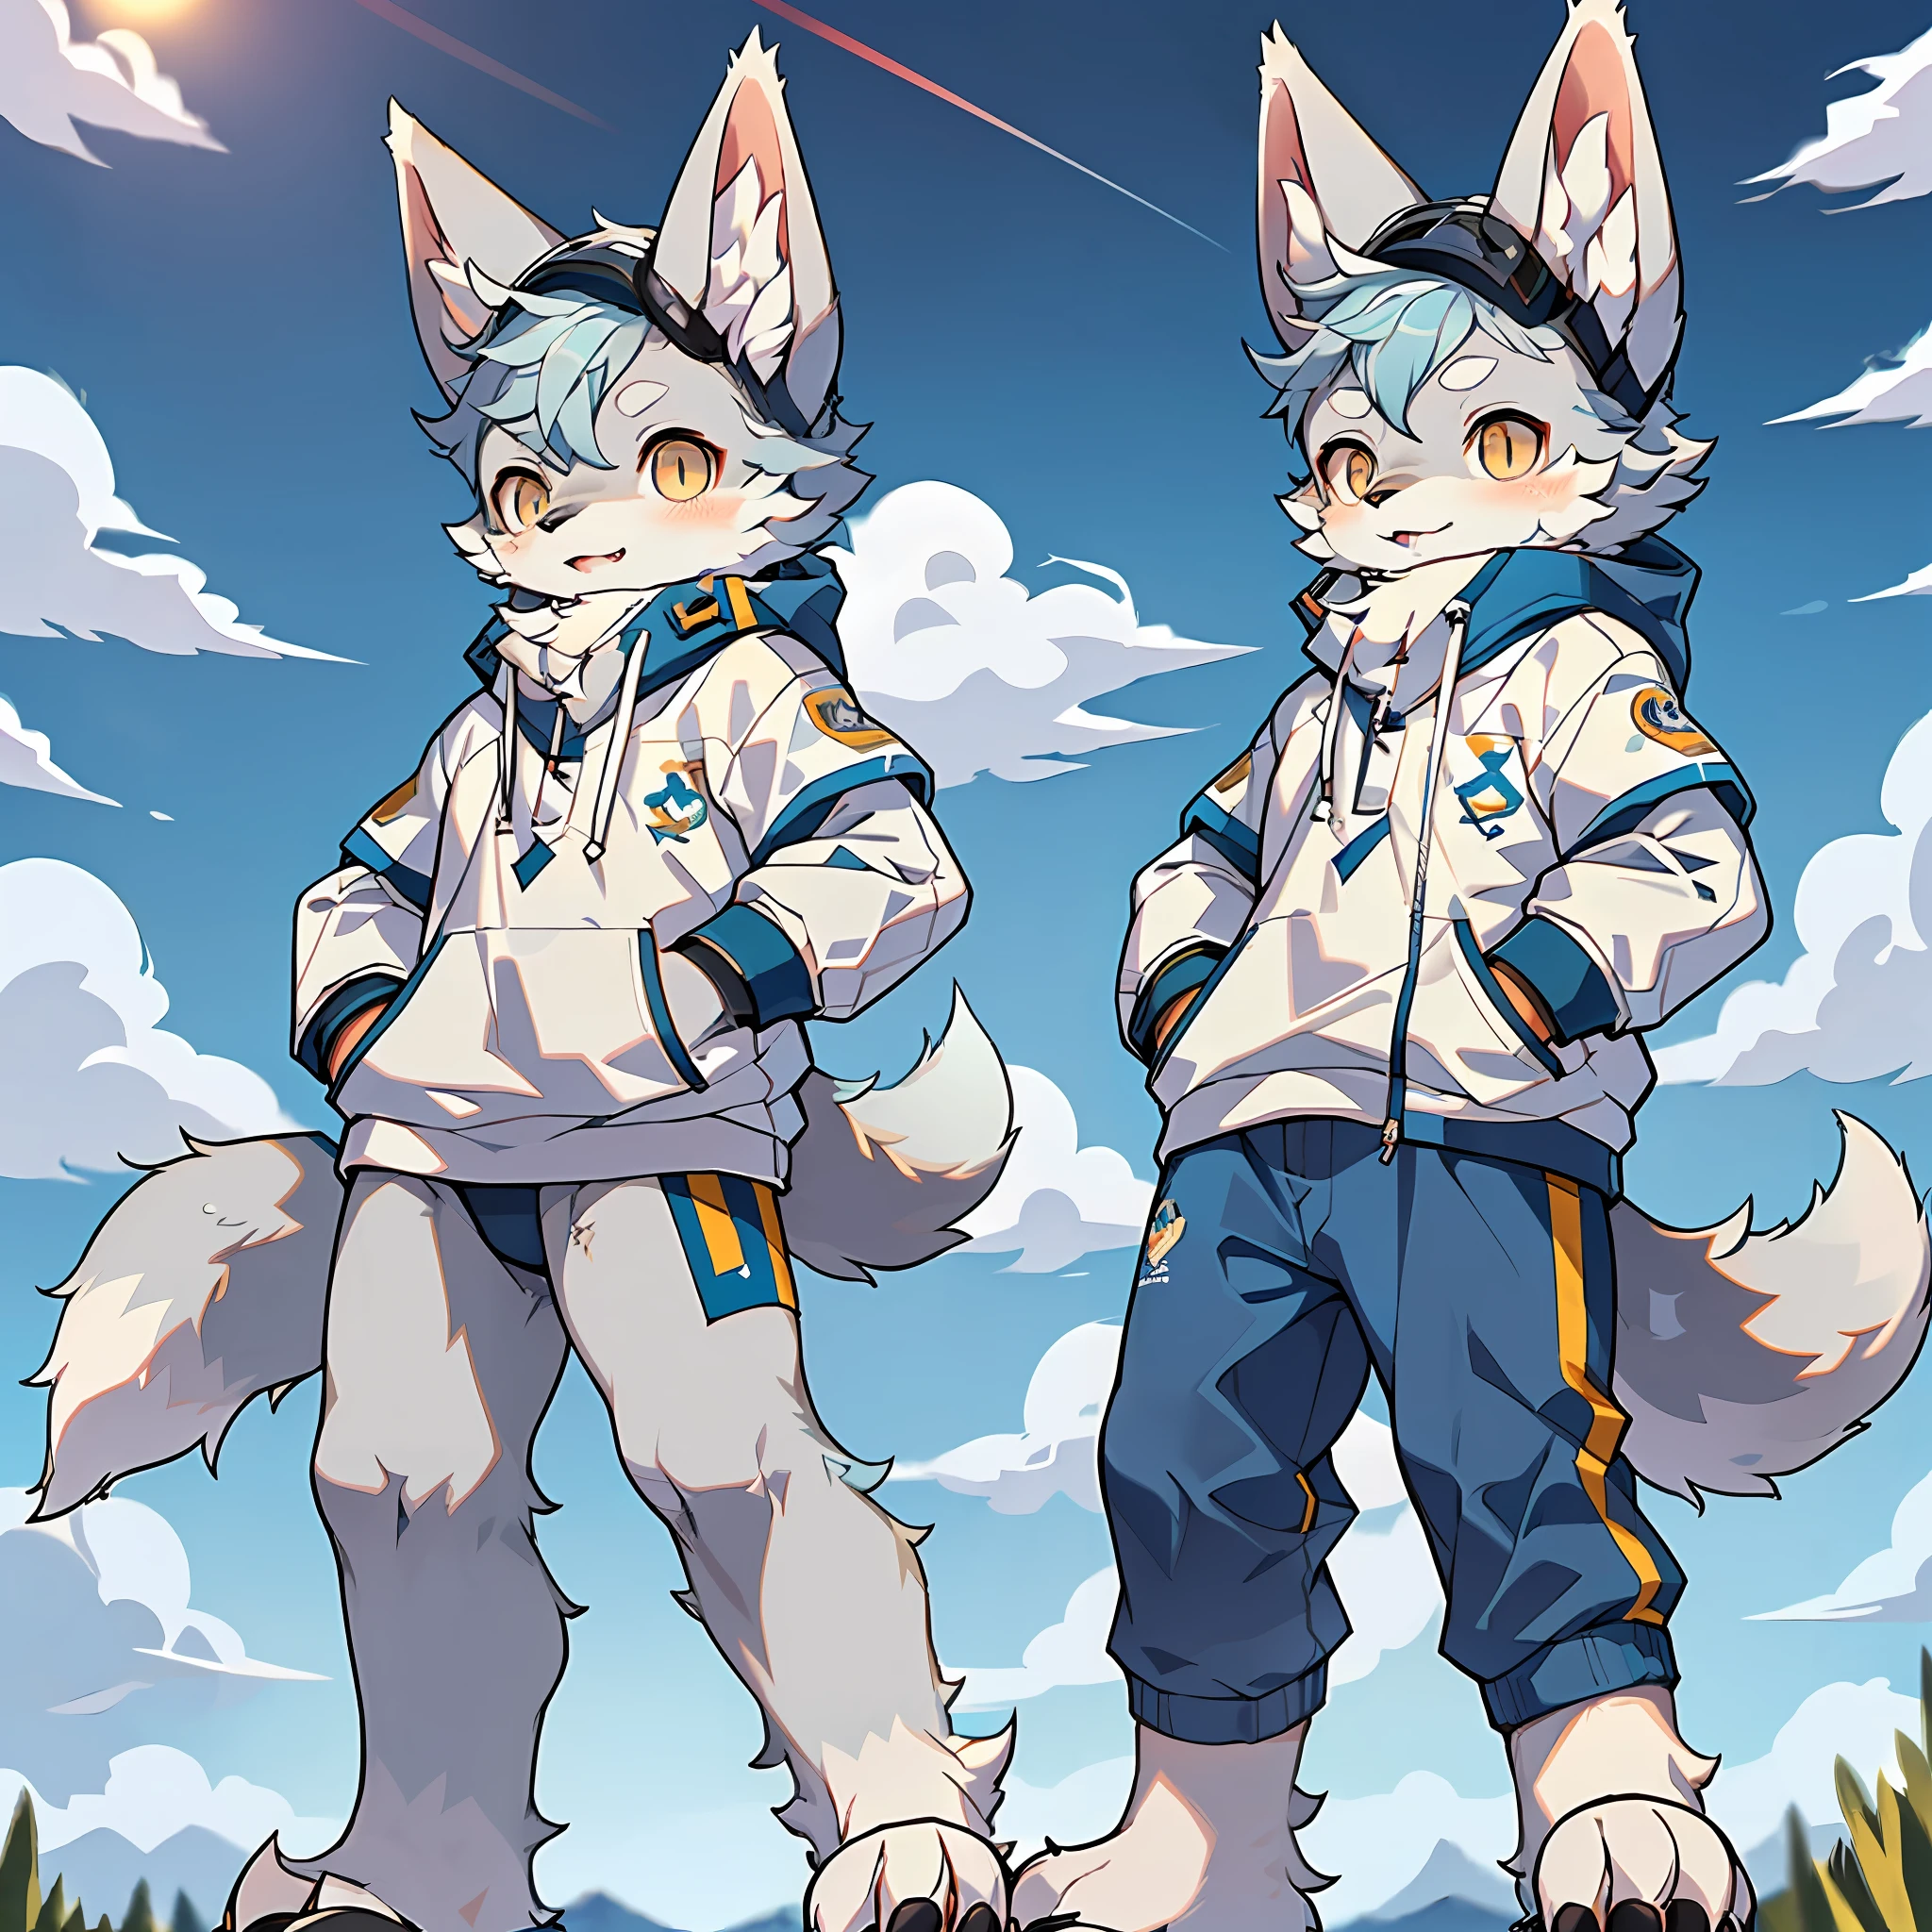 (Best Quality), (Masterpiece), ((Solitary), (Ultra Detailed), (Furry), Full Body Furry, Furry, (Male Arctic Fox: 1.5), (Gray Skin: 1.3), (Fluffy Tail: 1.2), Character Focus, (Golden Eyes), (Canine Paws), (Grey Ears), Sharp Focus, (Furry of Animal Ears), Wearing a Football Suit, Playing Soccer, On the Football Field, Detailed Background, Sunny Sky, Blue Sky and White Clouds